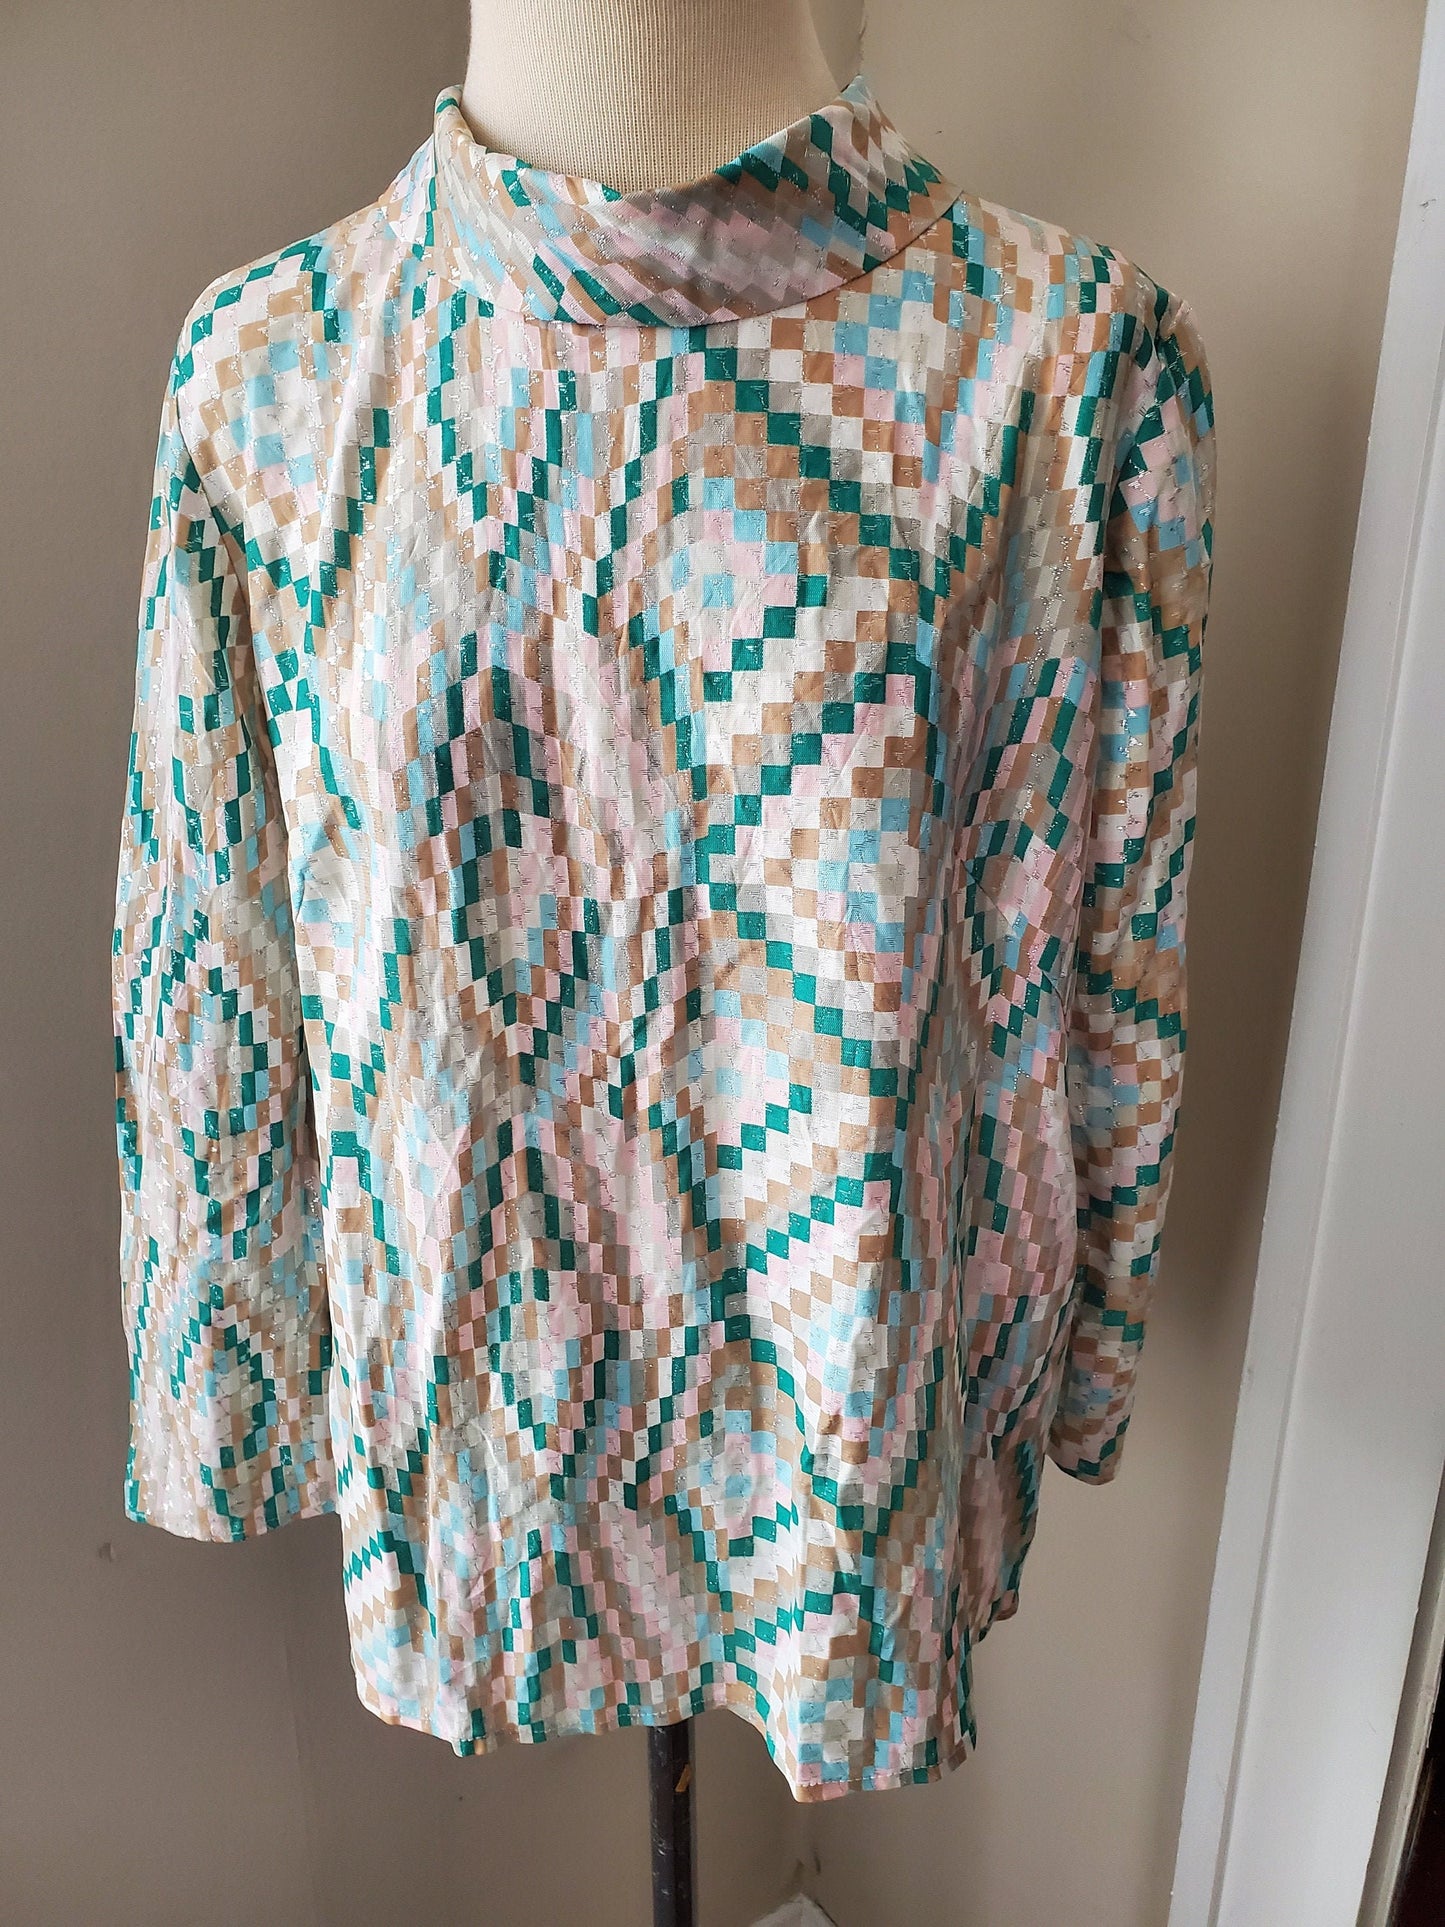 Vintage Long Sleeve Geometric Print Blouse with Shimmer